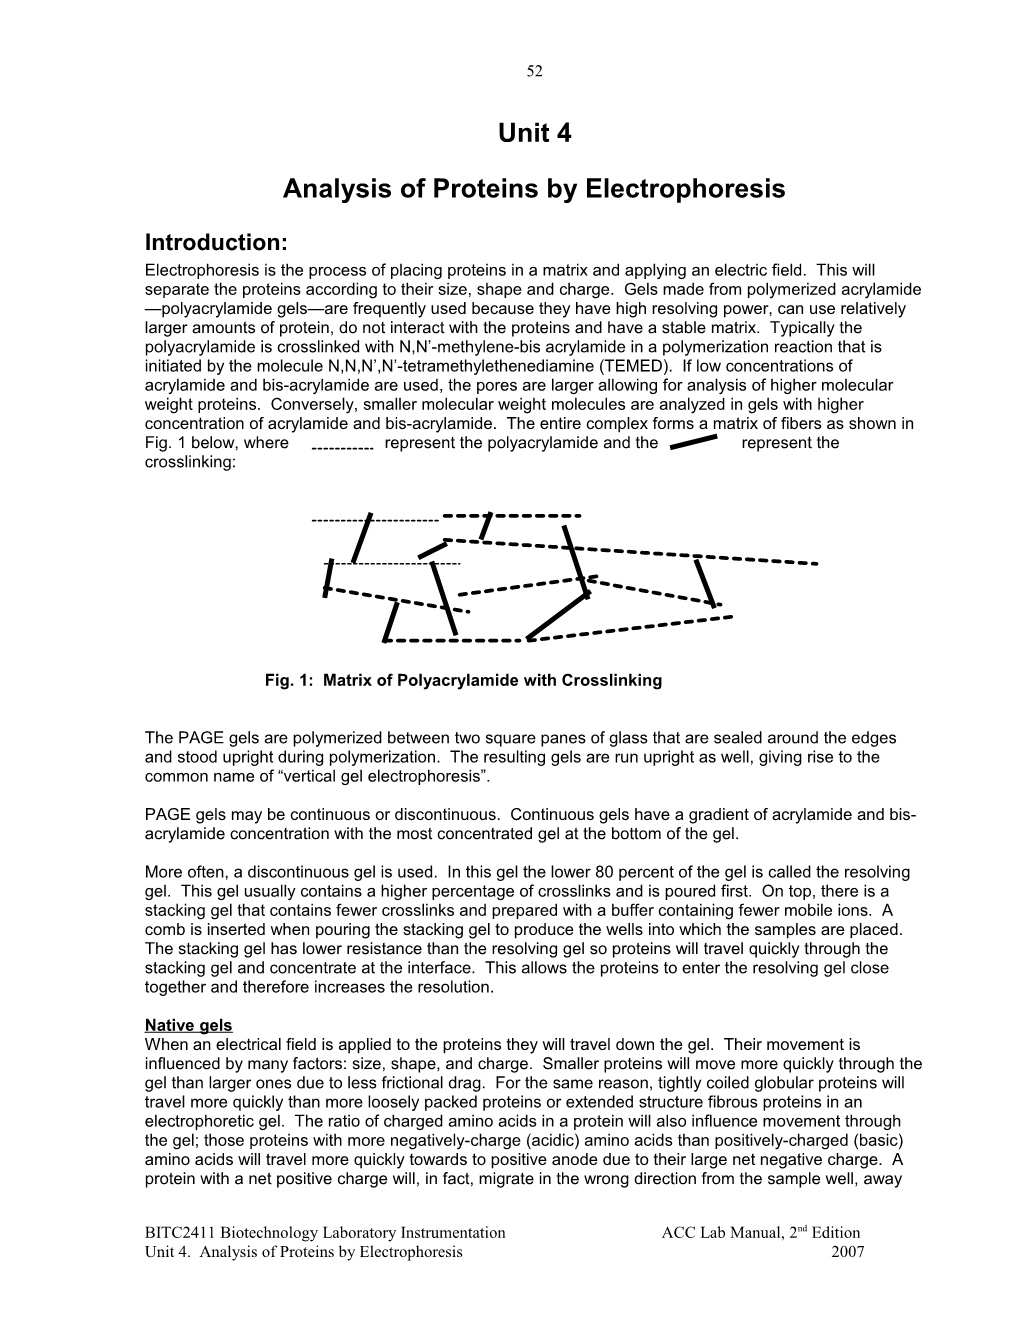 Analysis of Proteins by Electrophoresis